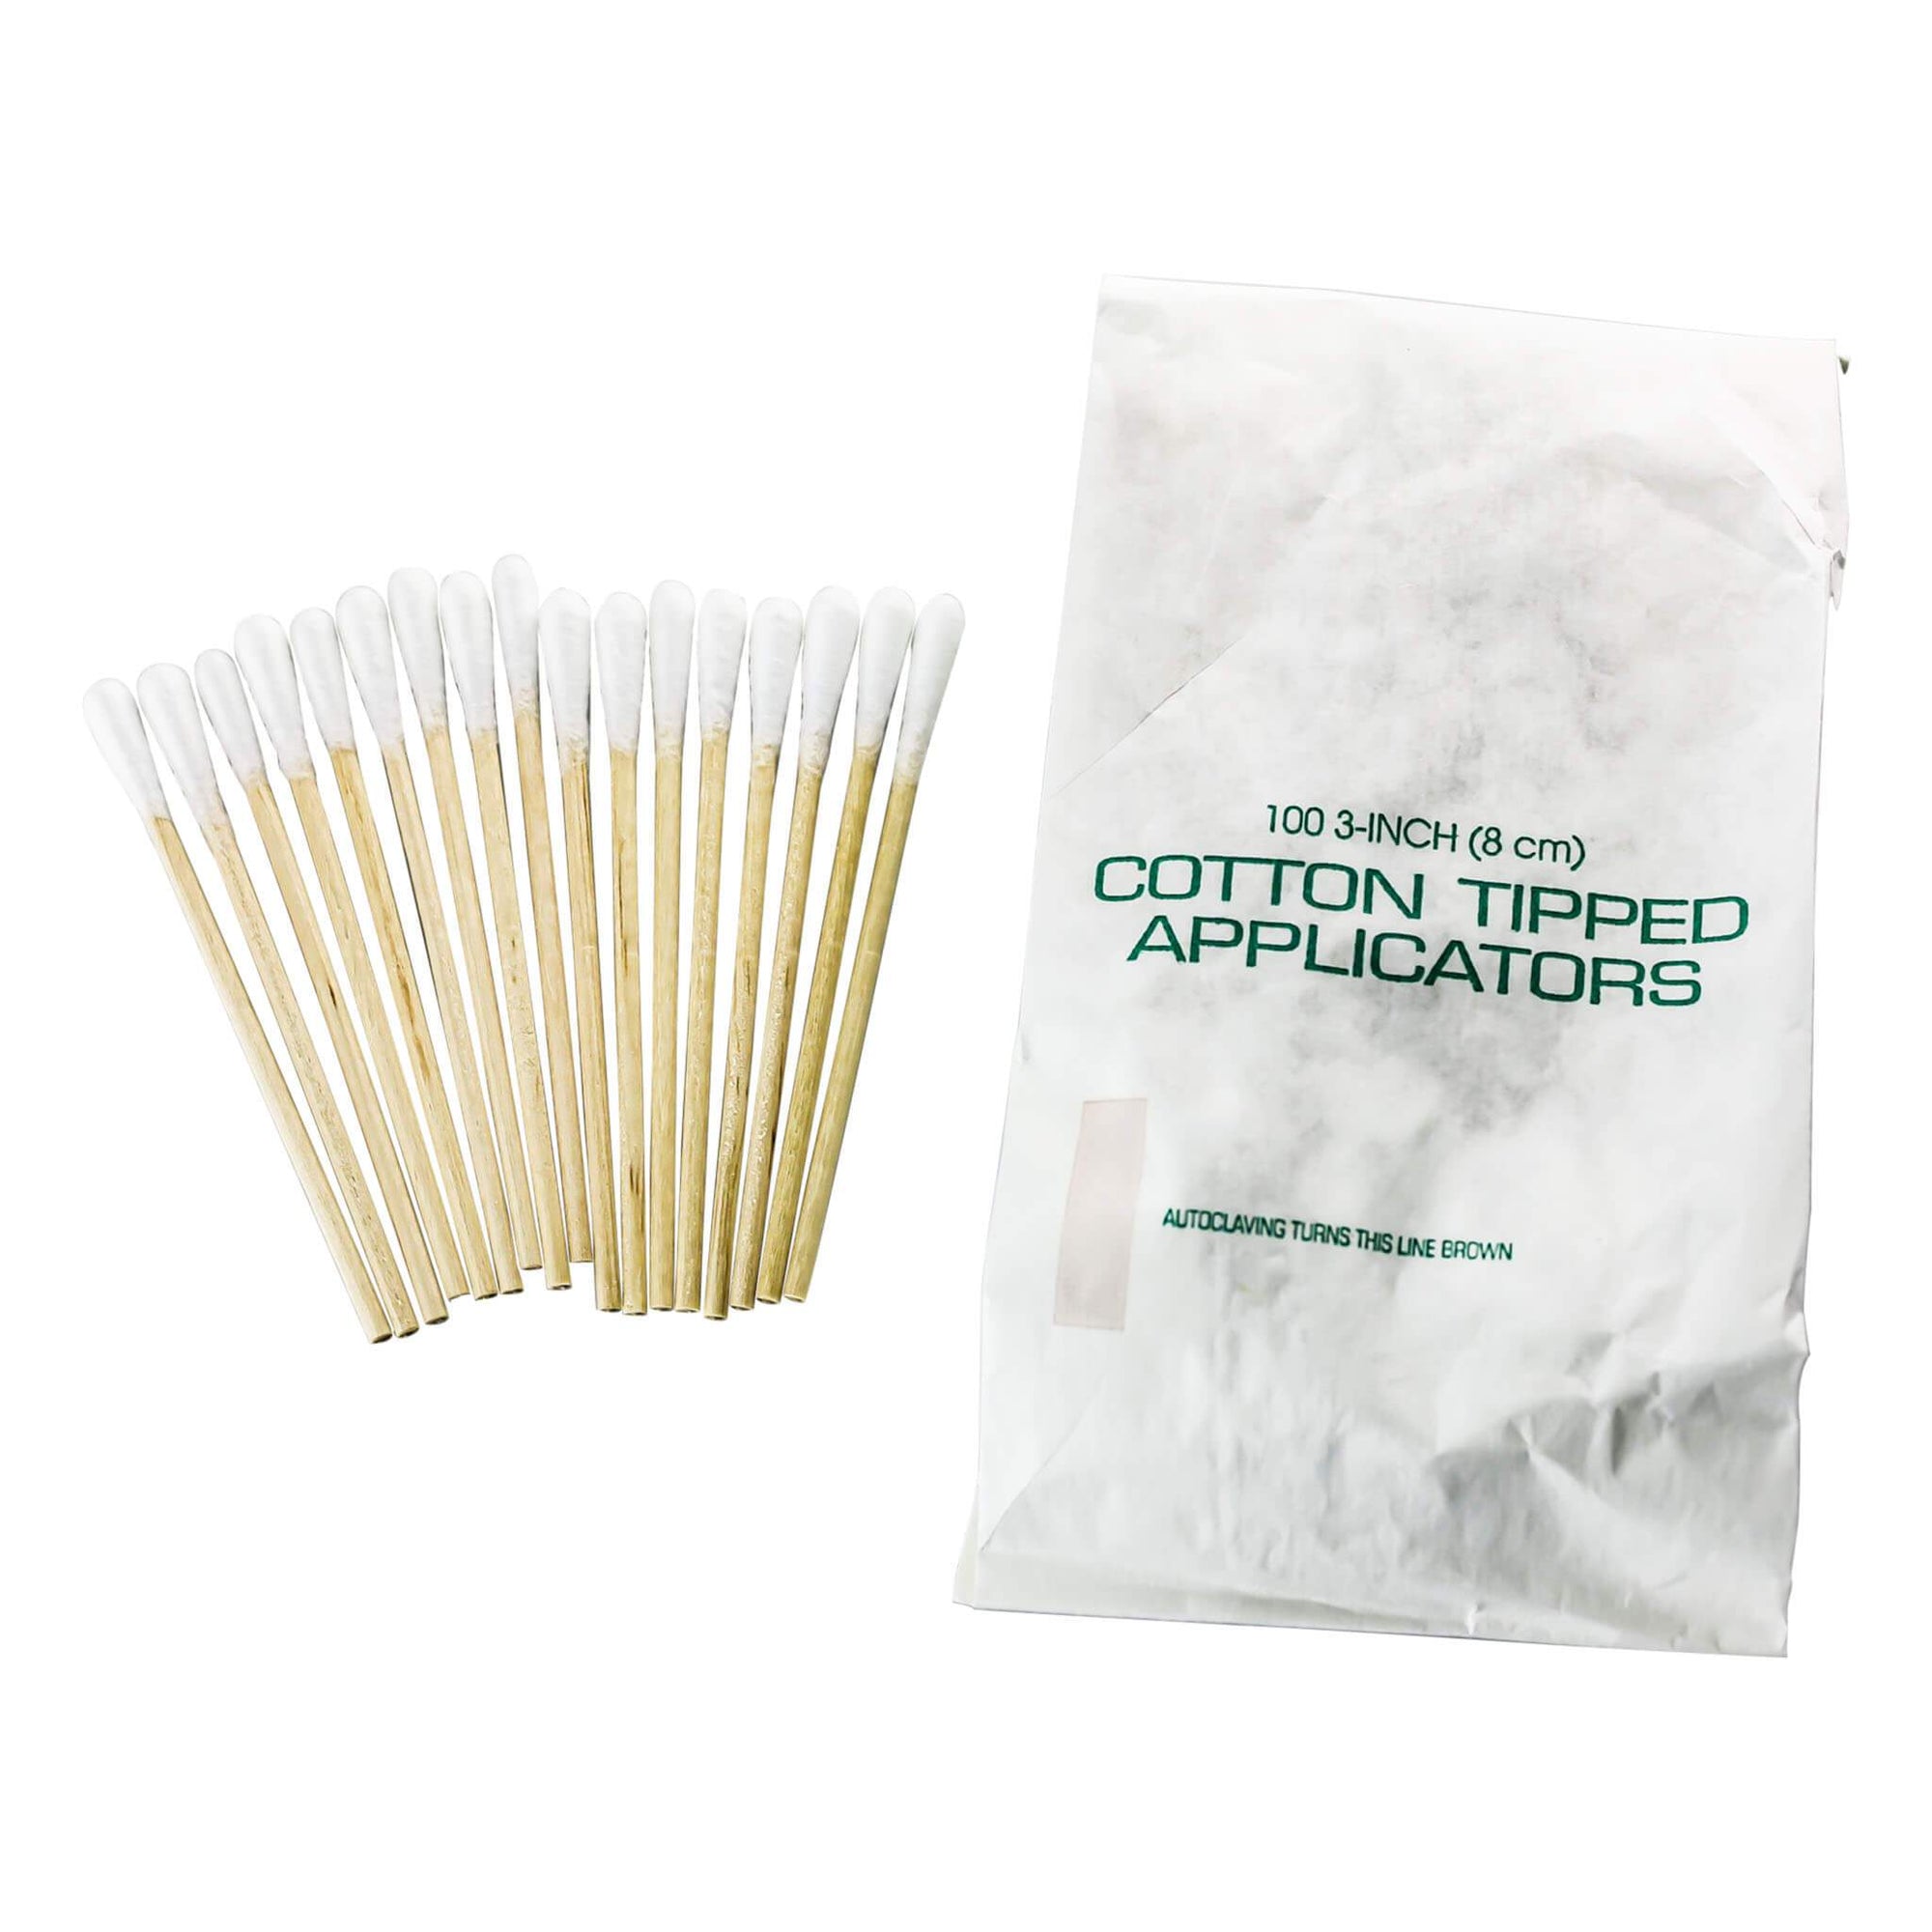 Puritan 3" Lint Free Cotton Swabs (Bags of 100) | In Bag & Out Of Bag View | Dabbing Warehouse